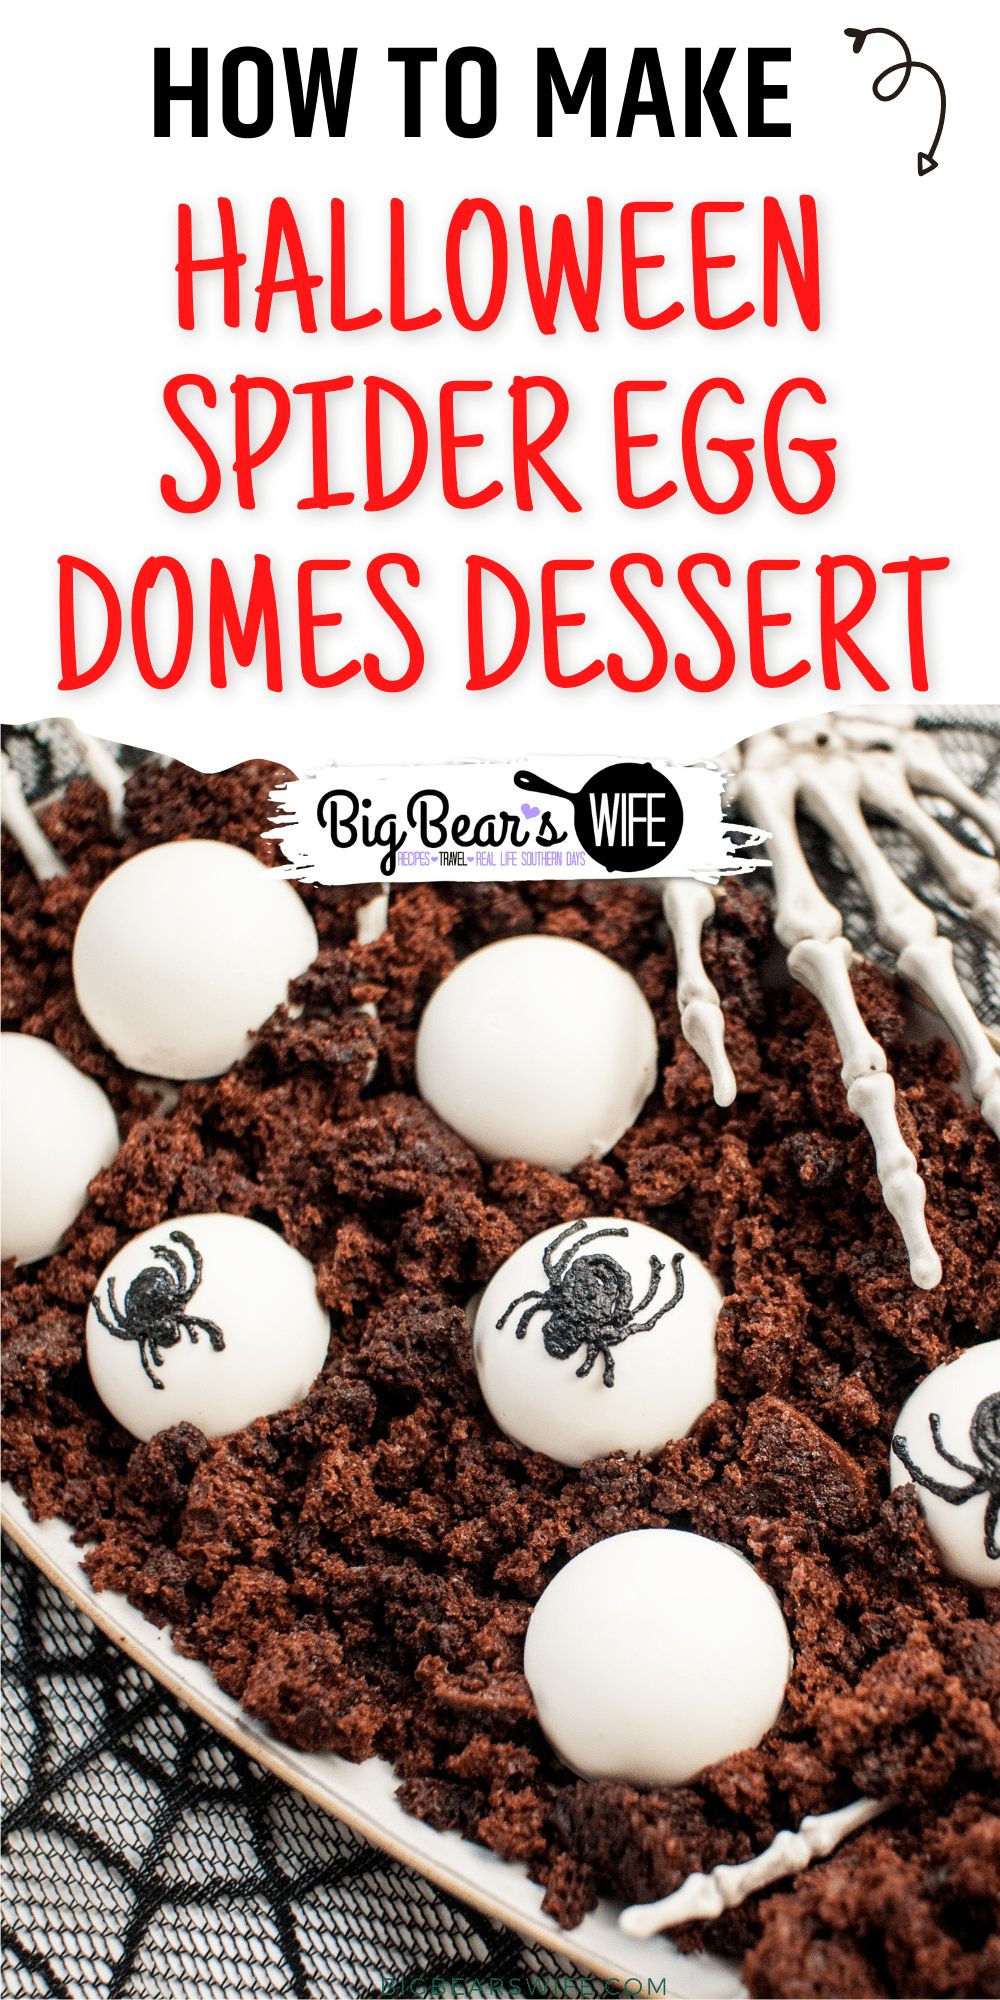 Halloween Spider Egg Domes Dessert - A creepy Halloween dessert, with layers of chocolate cake and dark chocolate mousse! These little bites are covered in white melting chocolate and decorated with black spiders to look like spider eggs. Perfect for Halloween! via @bigbearswife